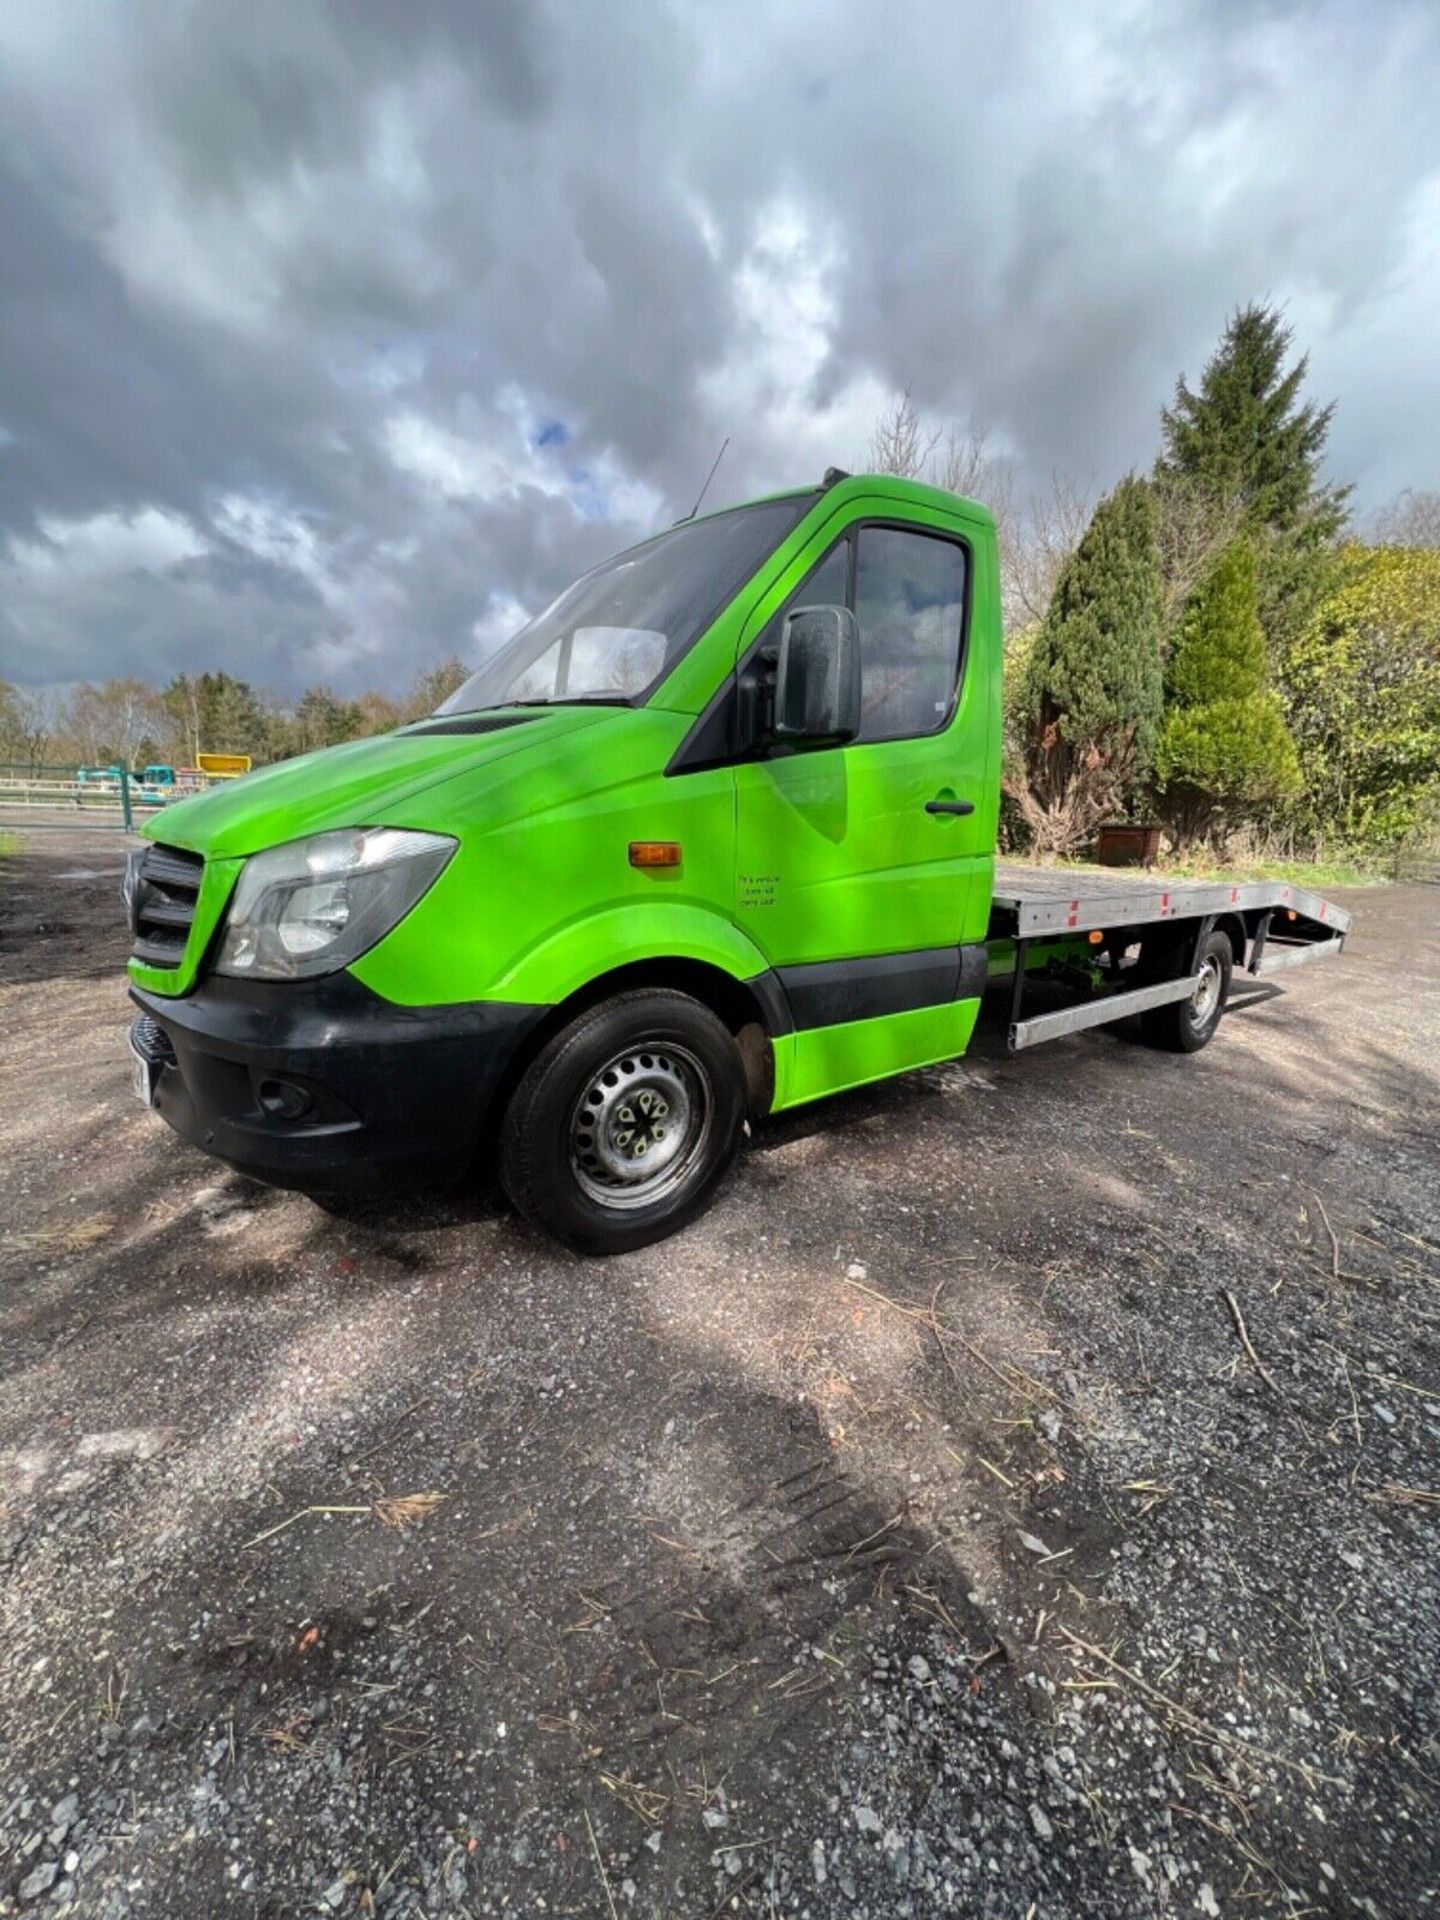 2017 MERCEDES SPRINTER RECOVERY TRUCK - 314 CDI FULL BED - EURO 6 - Image 11 of 23